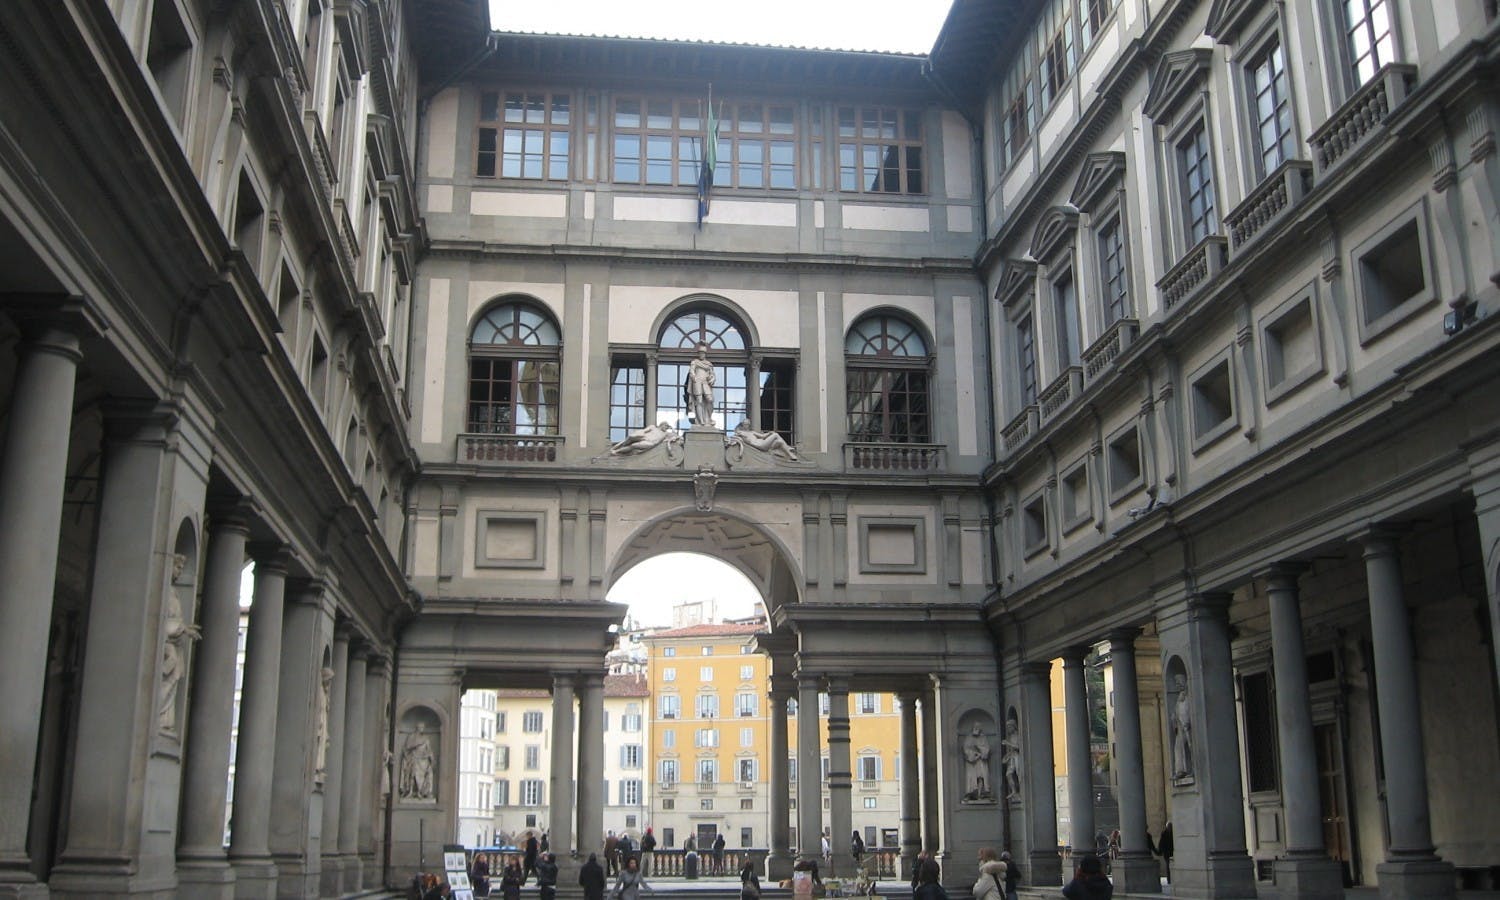 florence-day-tour-with-uffizi-and-accademia-gallery-skip-the-line-tickets-and-guided-visit_header-6505.jpeg